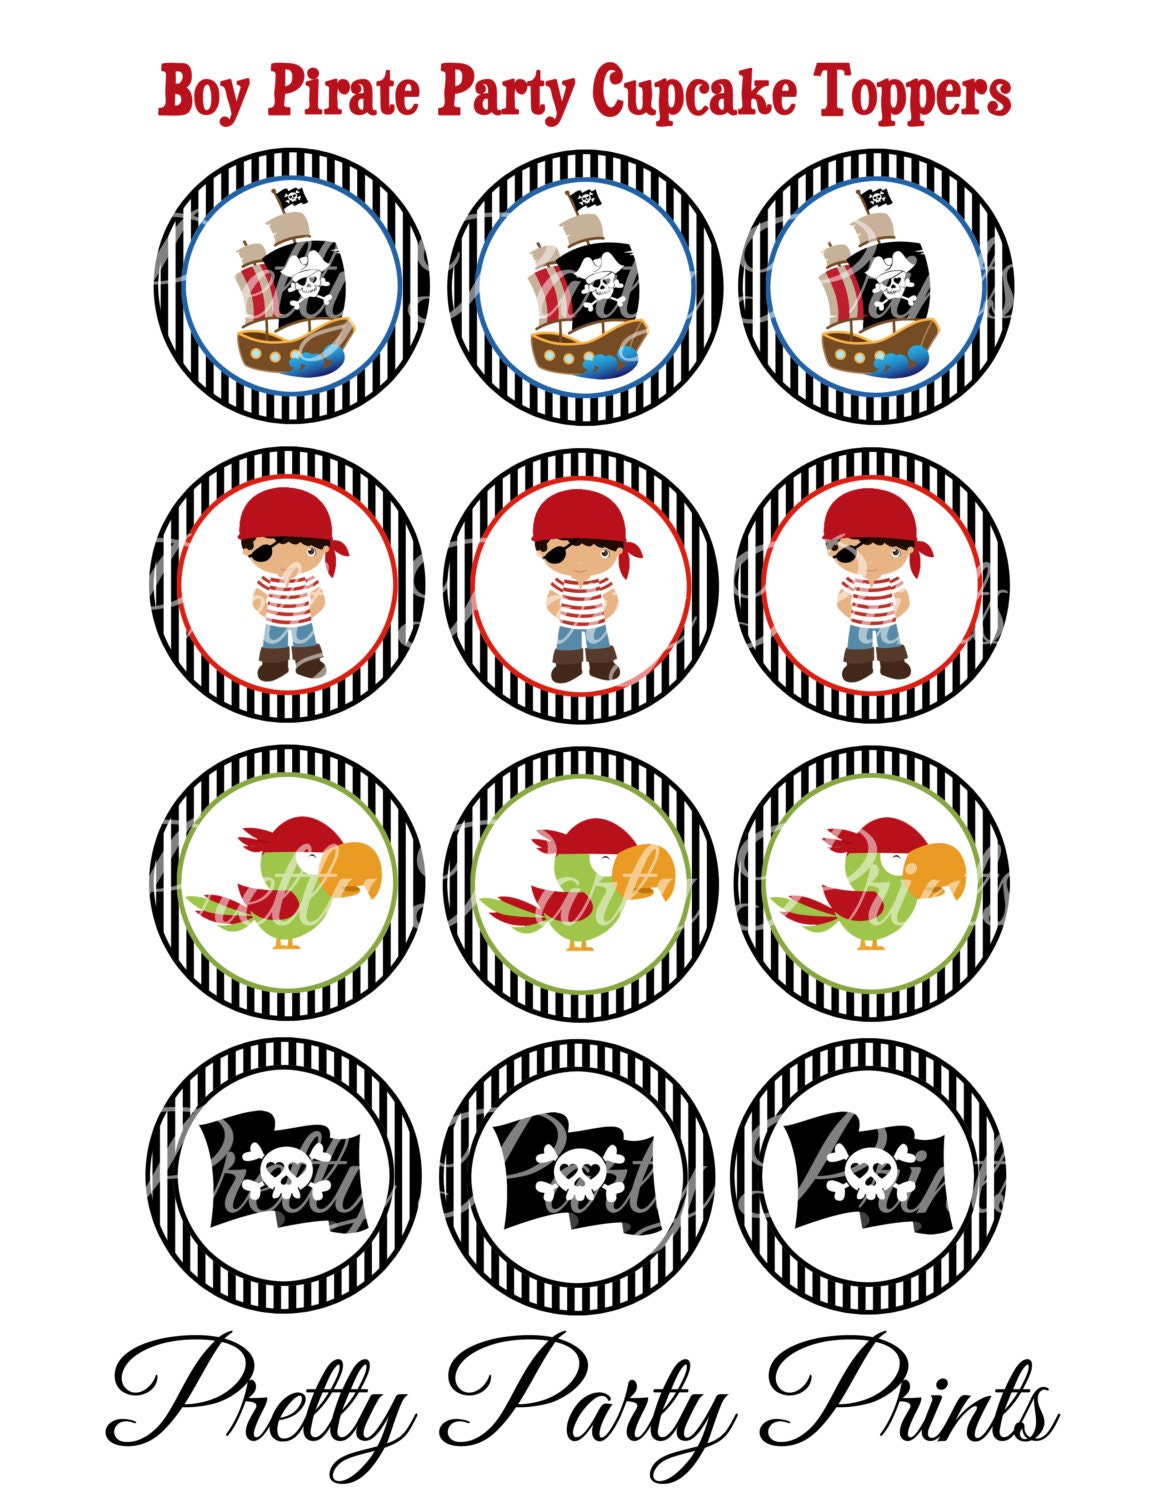 printable-cupcake-toppers-pirate-party-2-inch-by-prettypartyprints